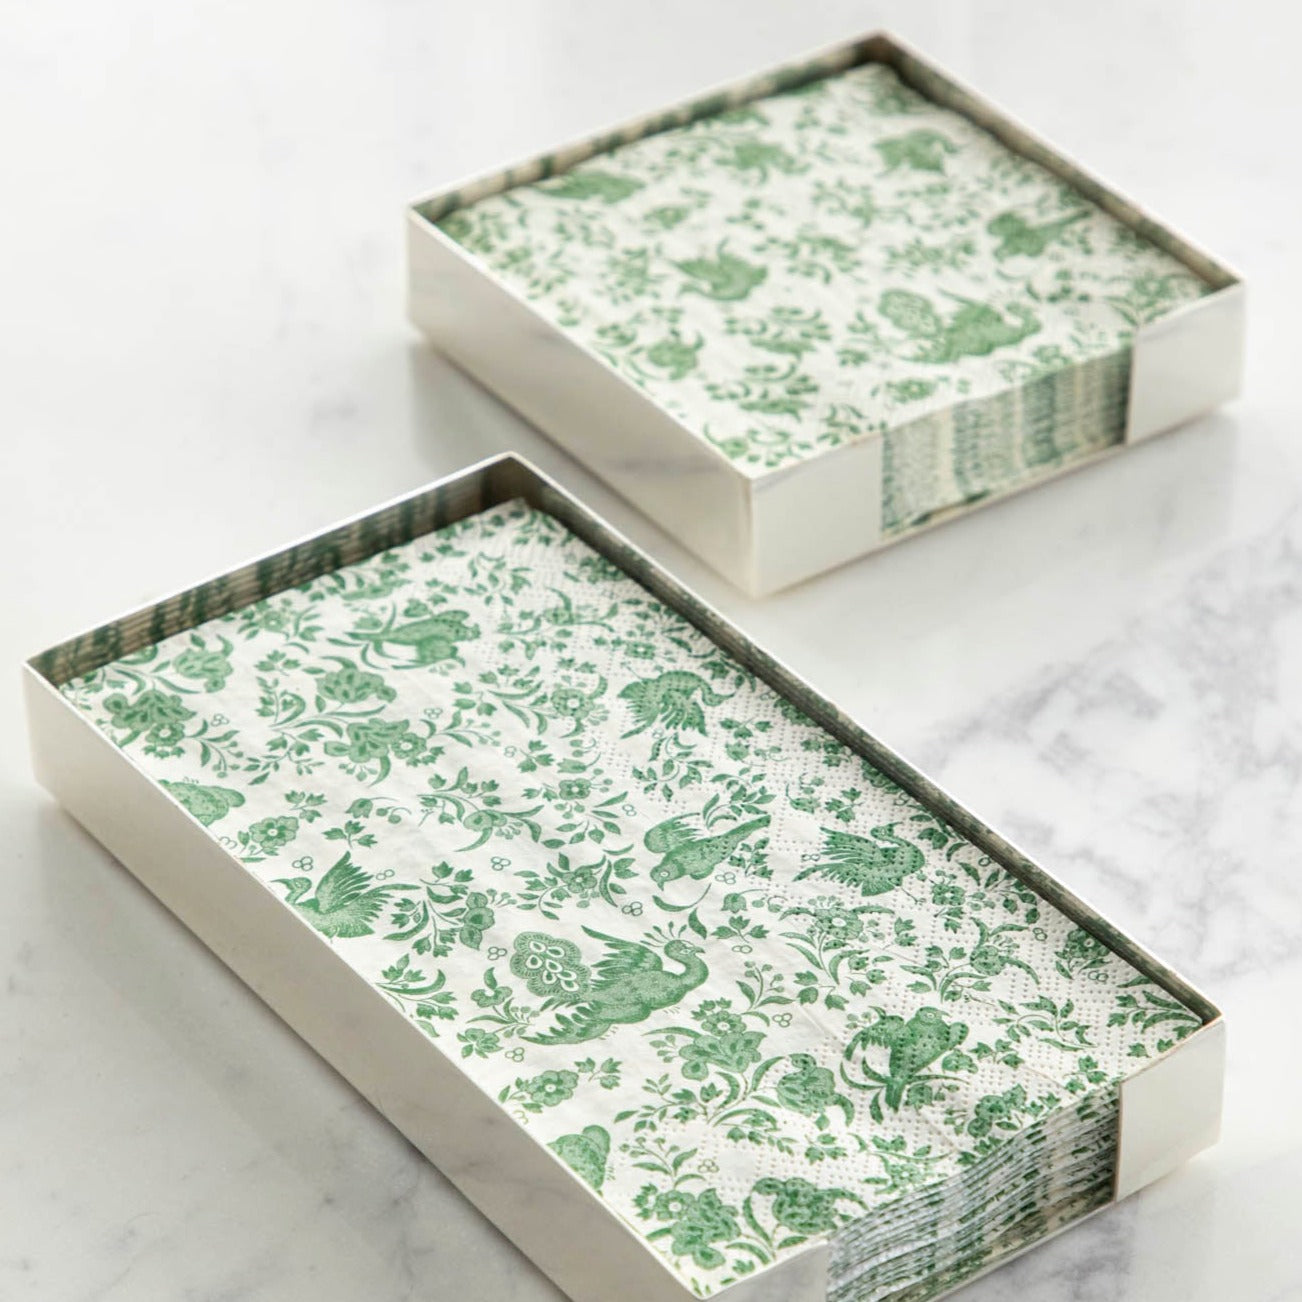 Two Silver Napkin Holders, guest-sized and cocktail-sized, containing green and white napkins on a white table.